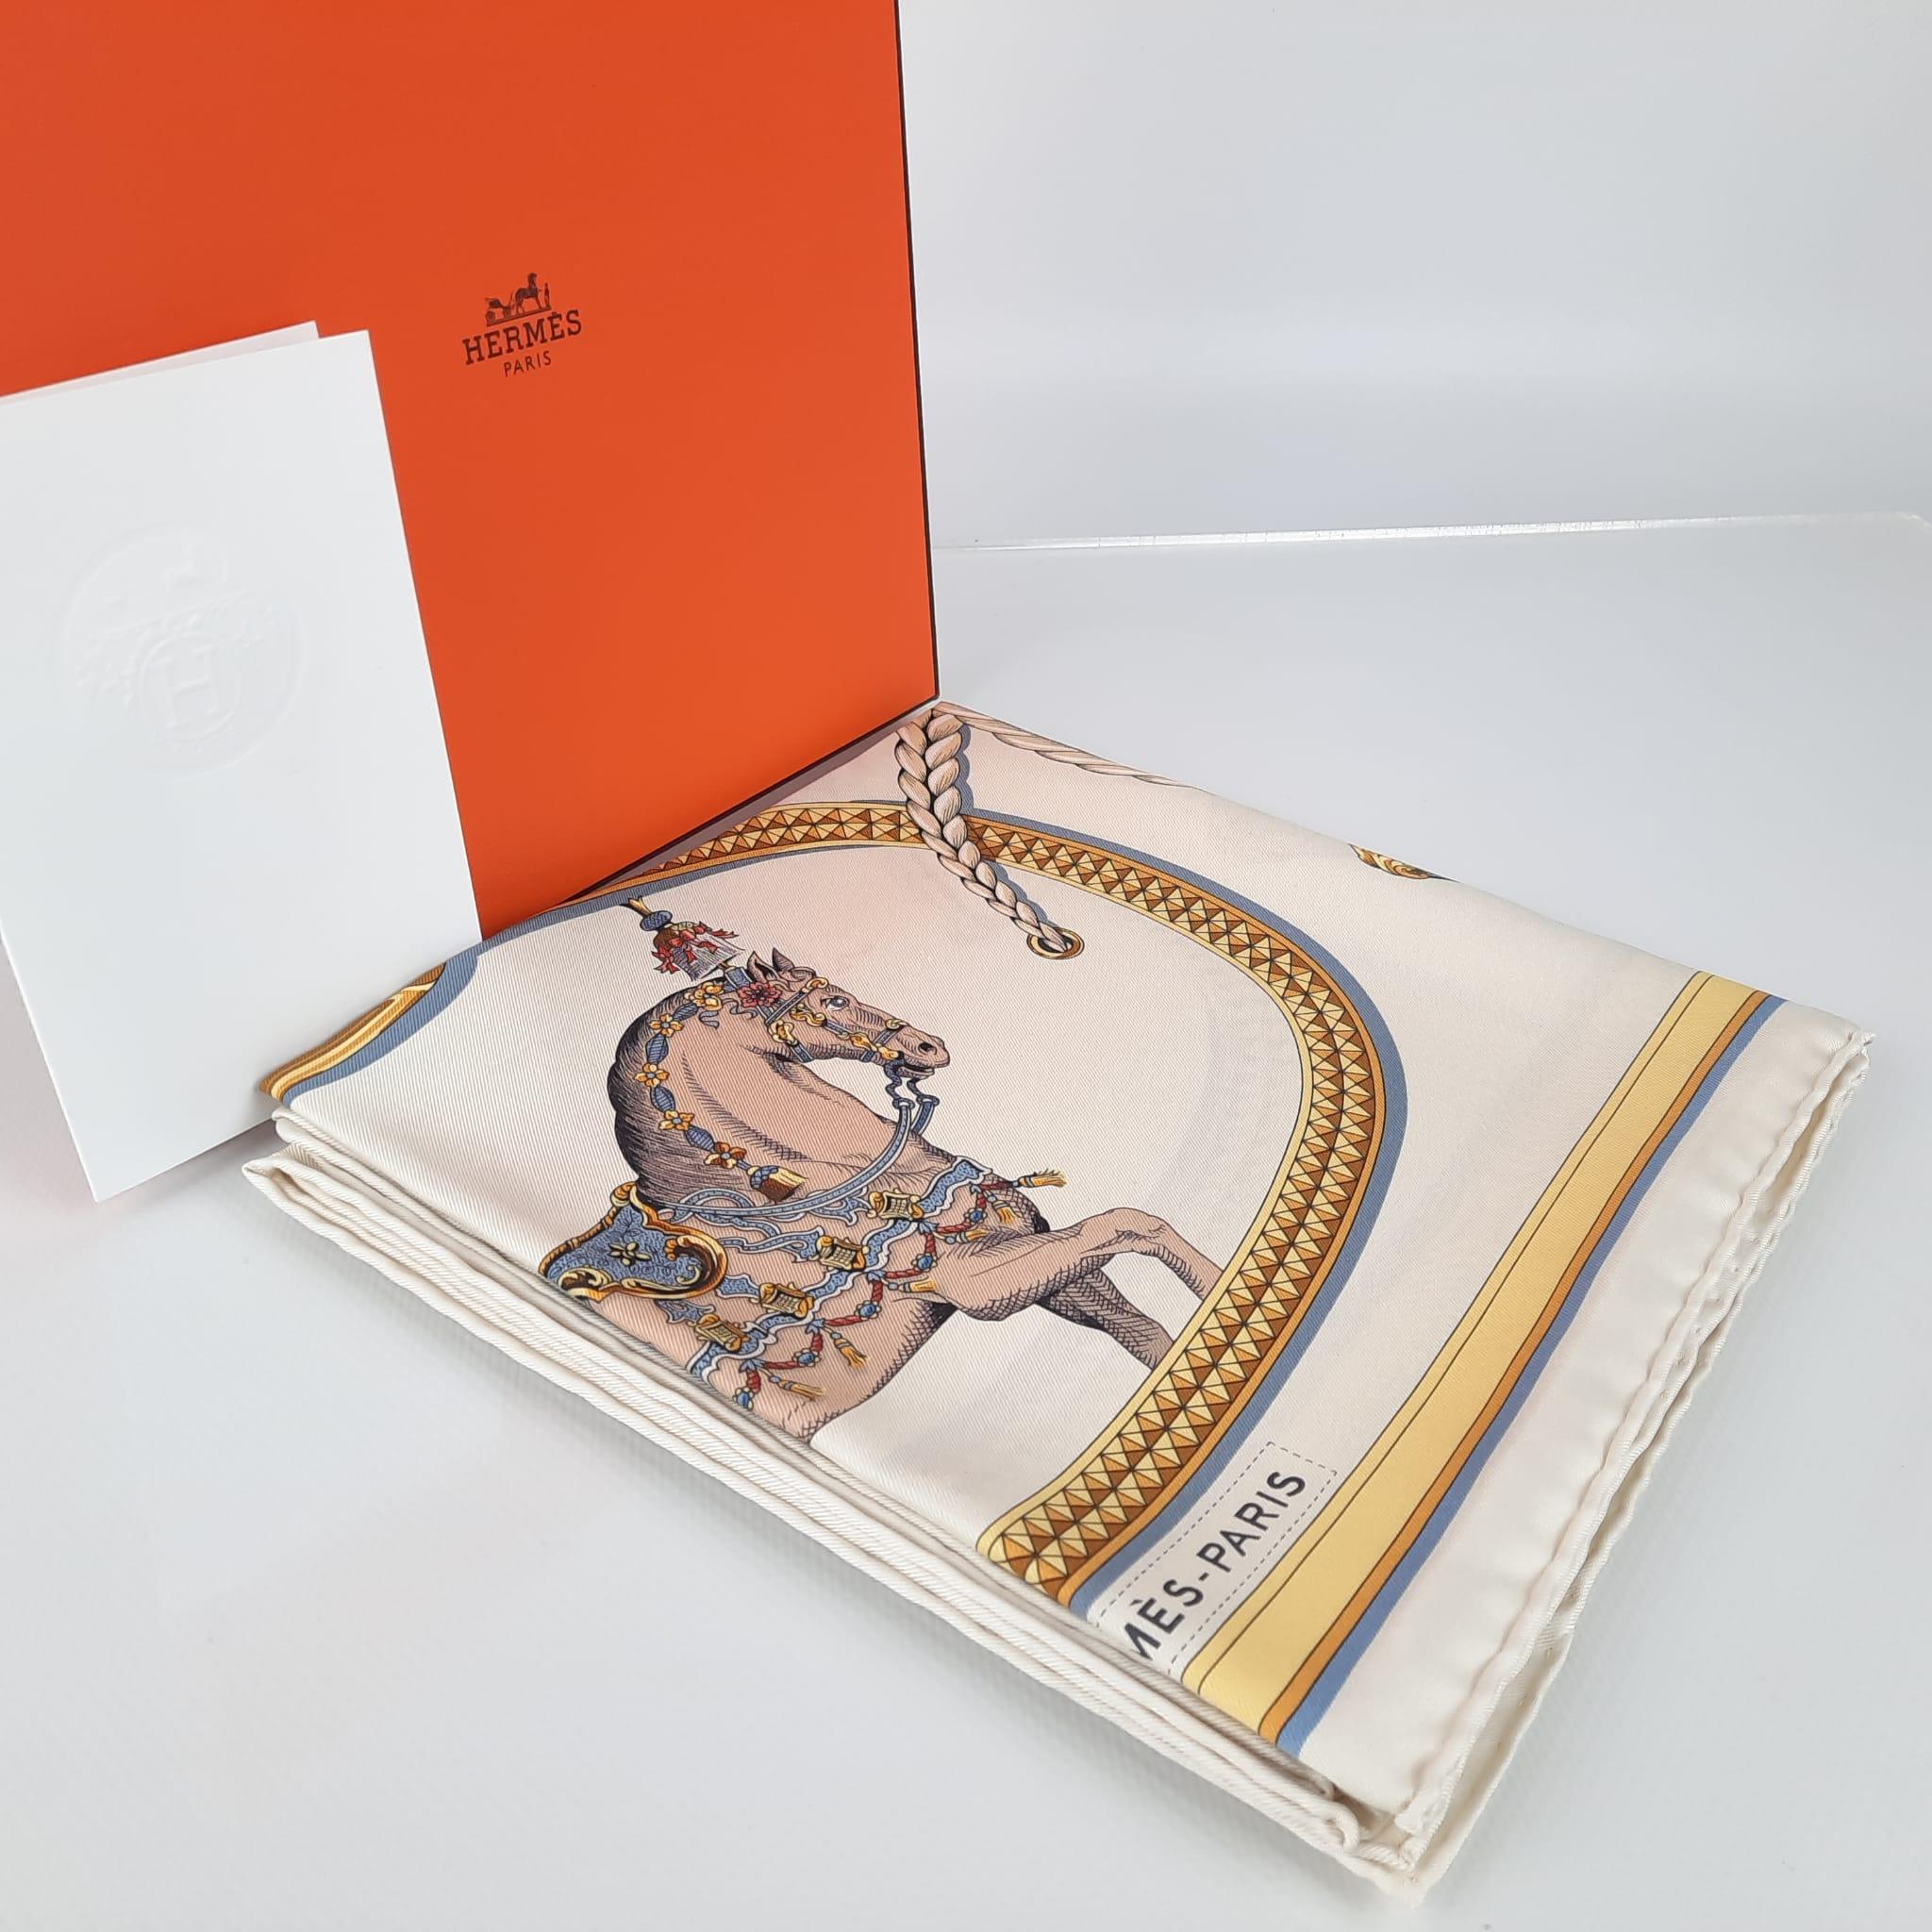 Hermes Crème / Gold / Multicolore Grand Apparat forever scarf 90 1